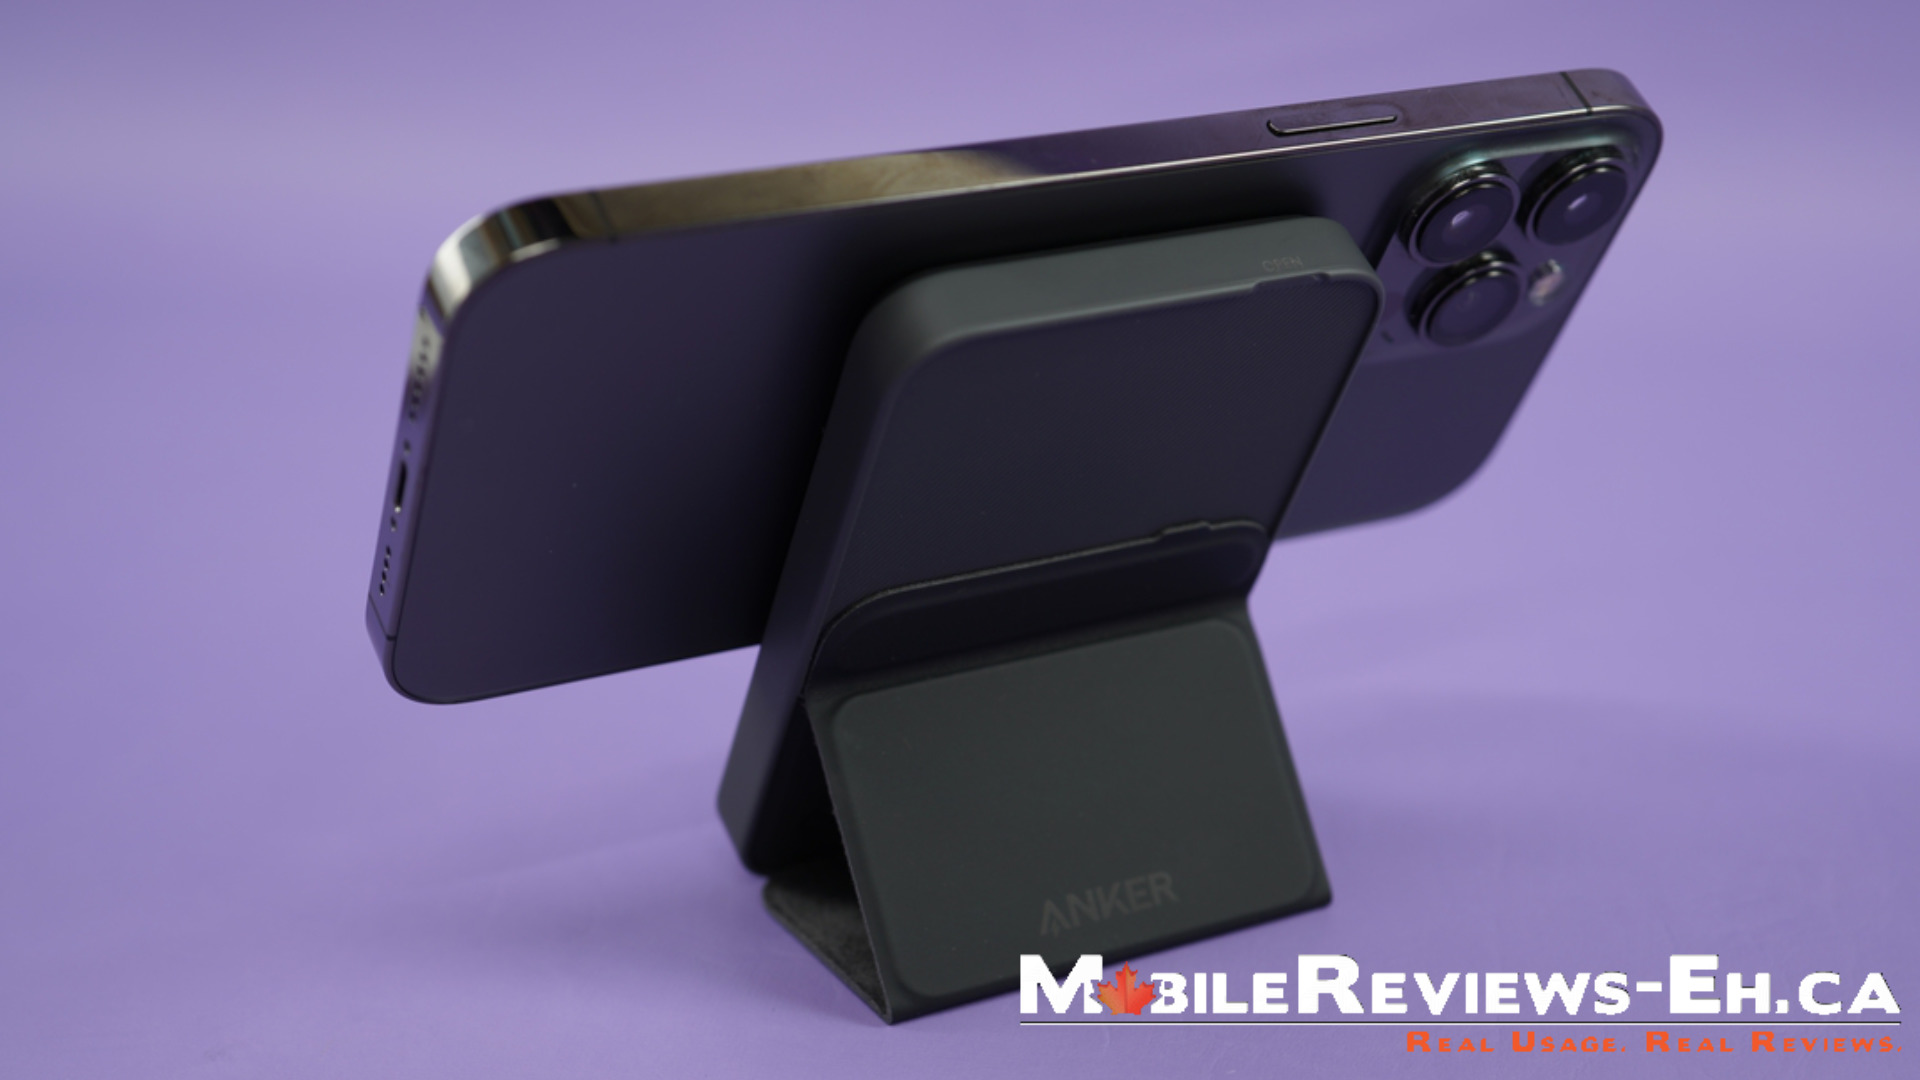 Anker 622 MagGo Magnetic Foldable Battery Review - Mobile Reviews Eh